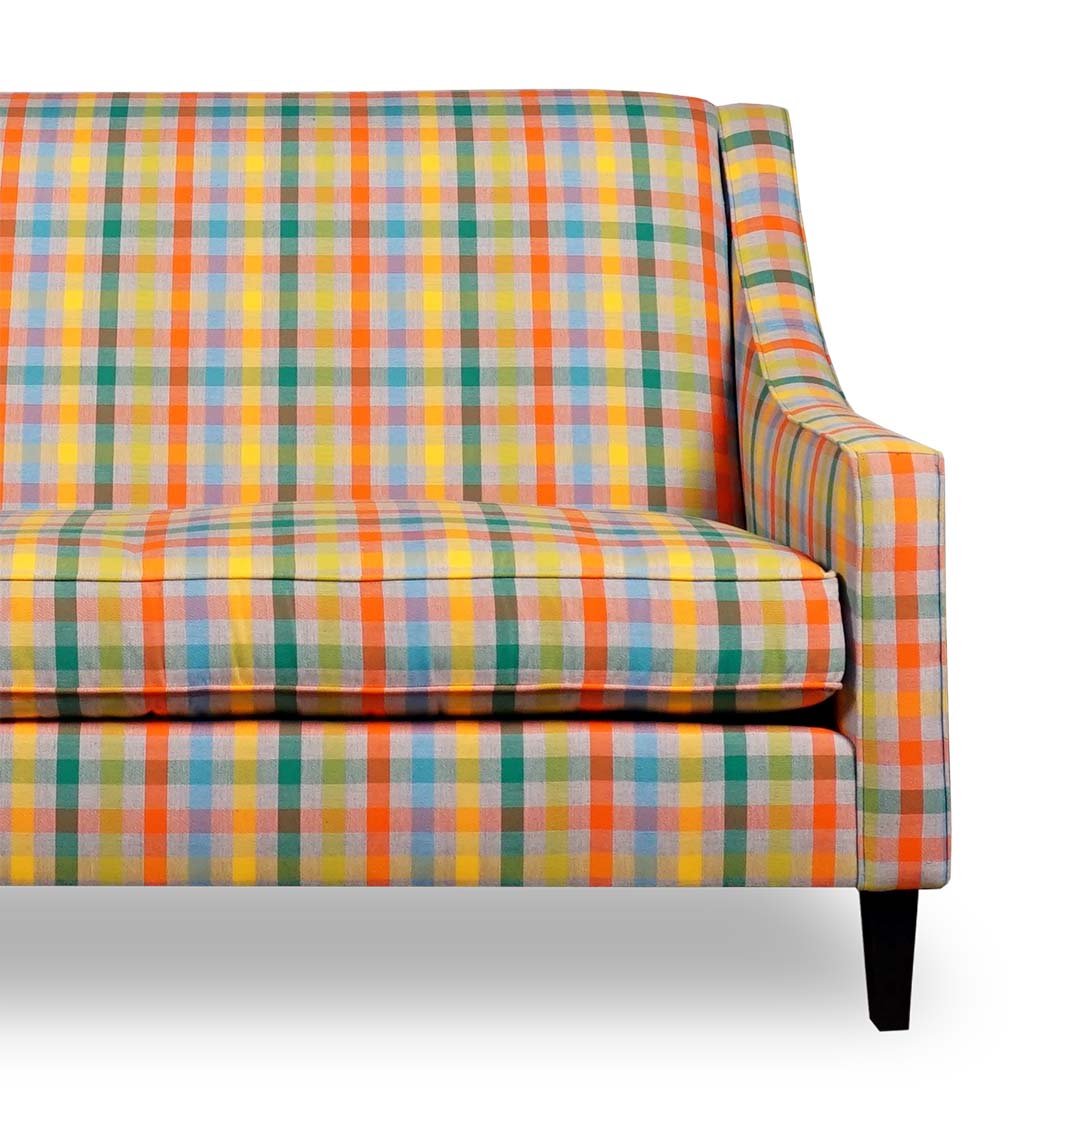 Gracie loveseat in colorful plaid fabric